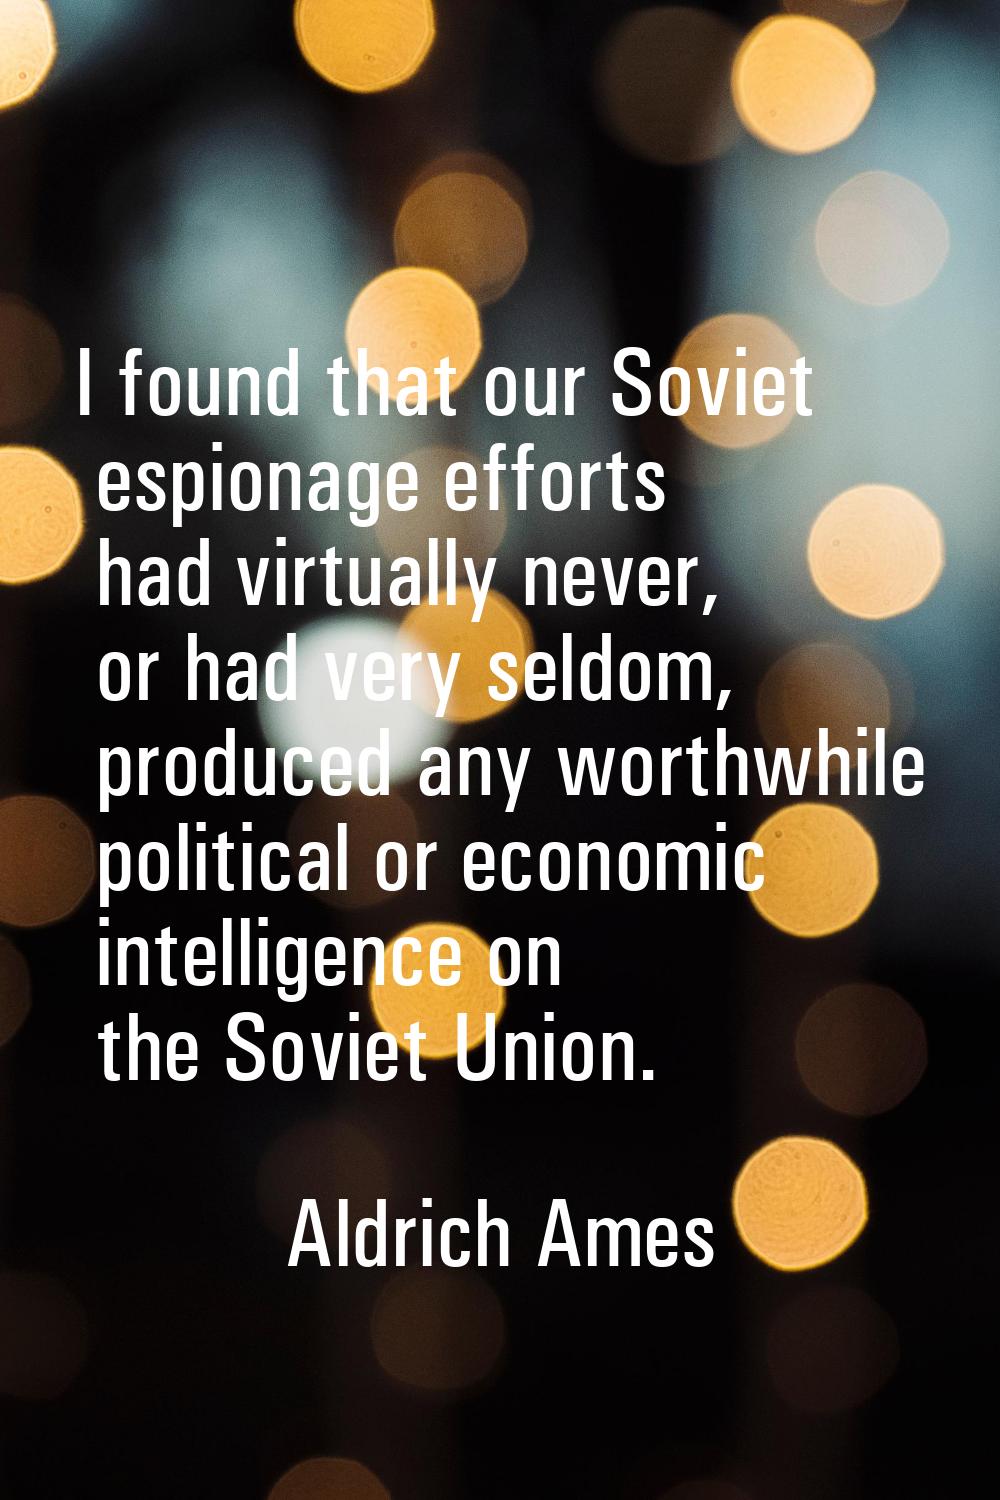 I found that our Soviet espionage efforts had virtually never, or had very seldom, produced any wor